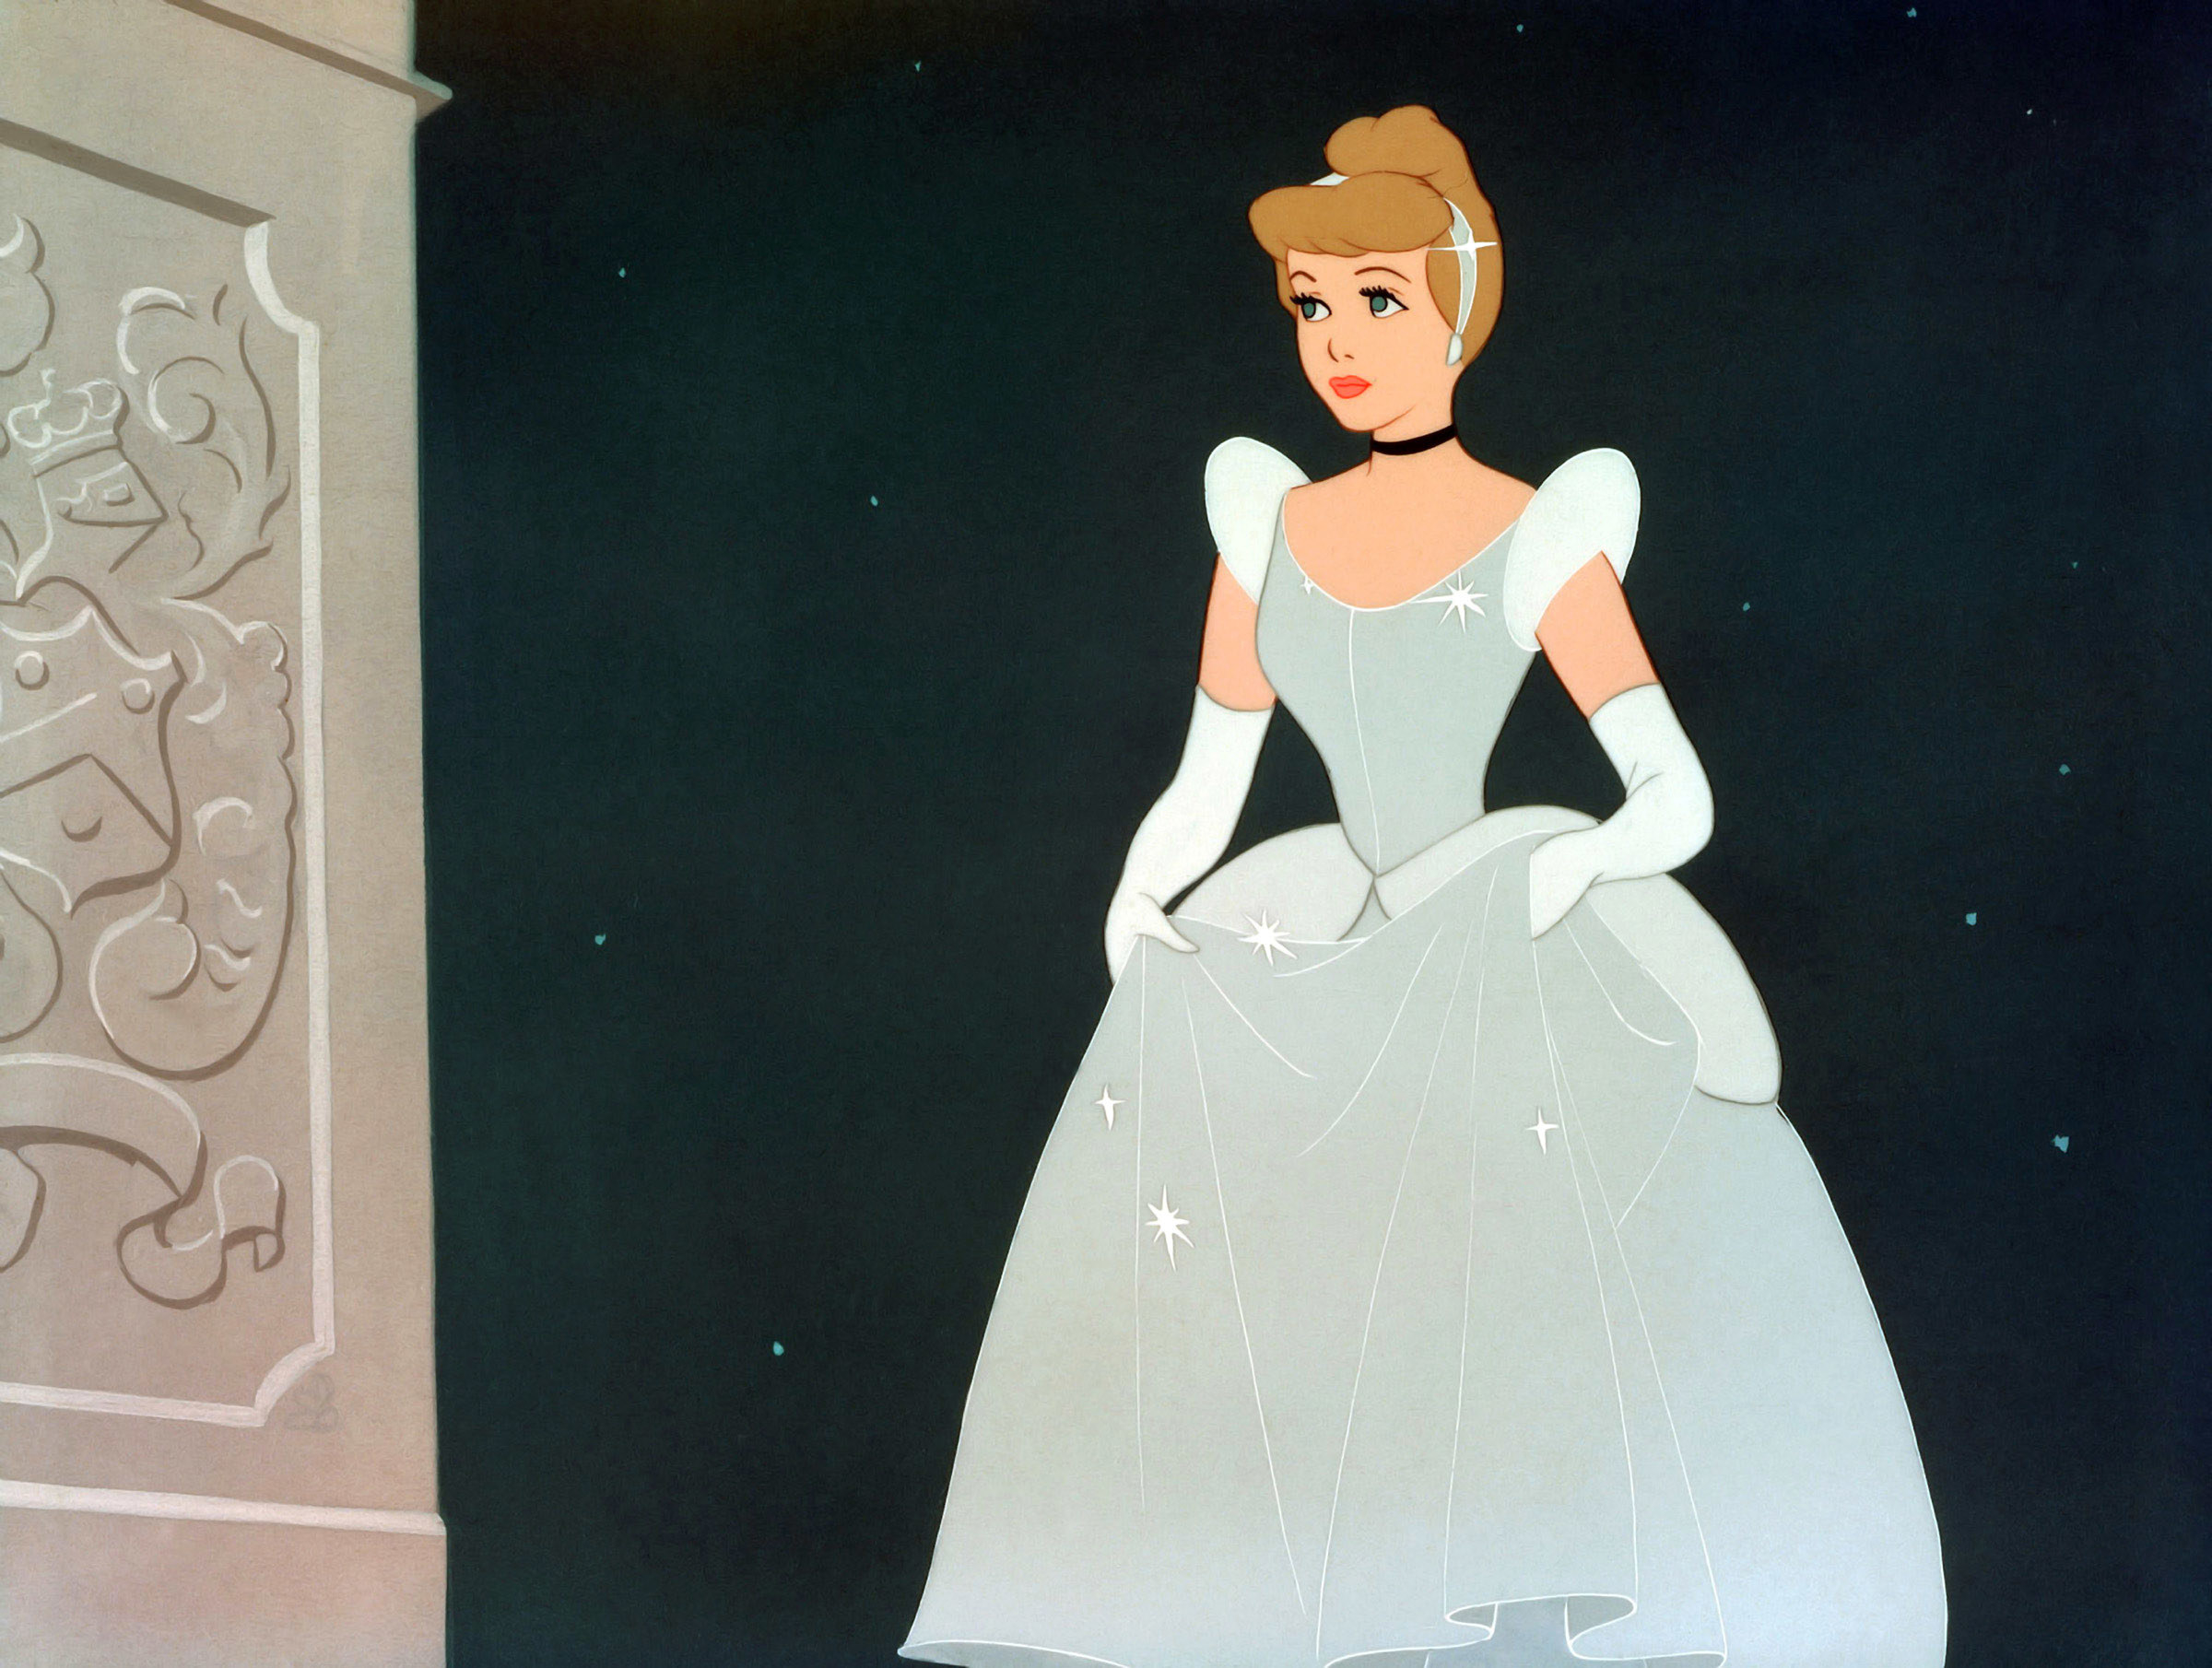 Cinderella entering the ball in a gown